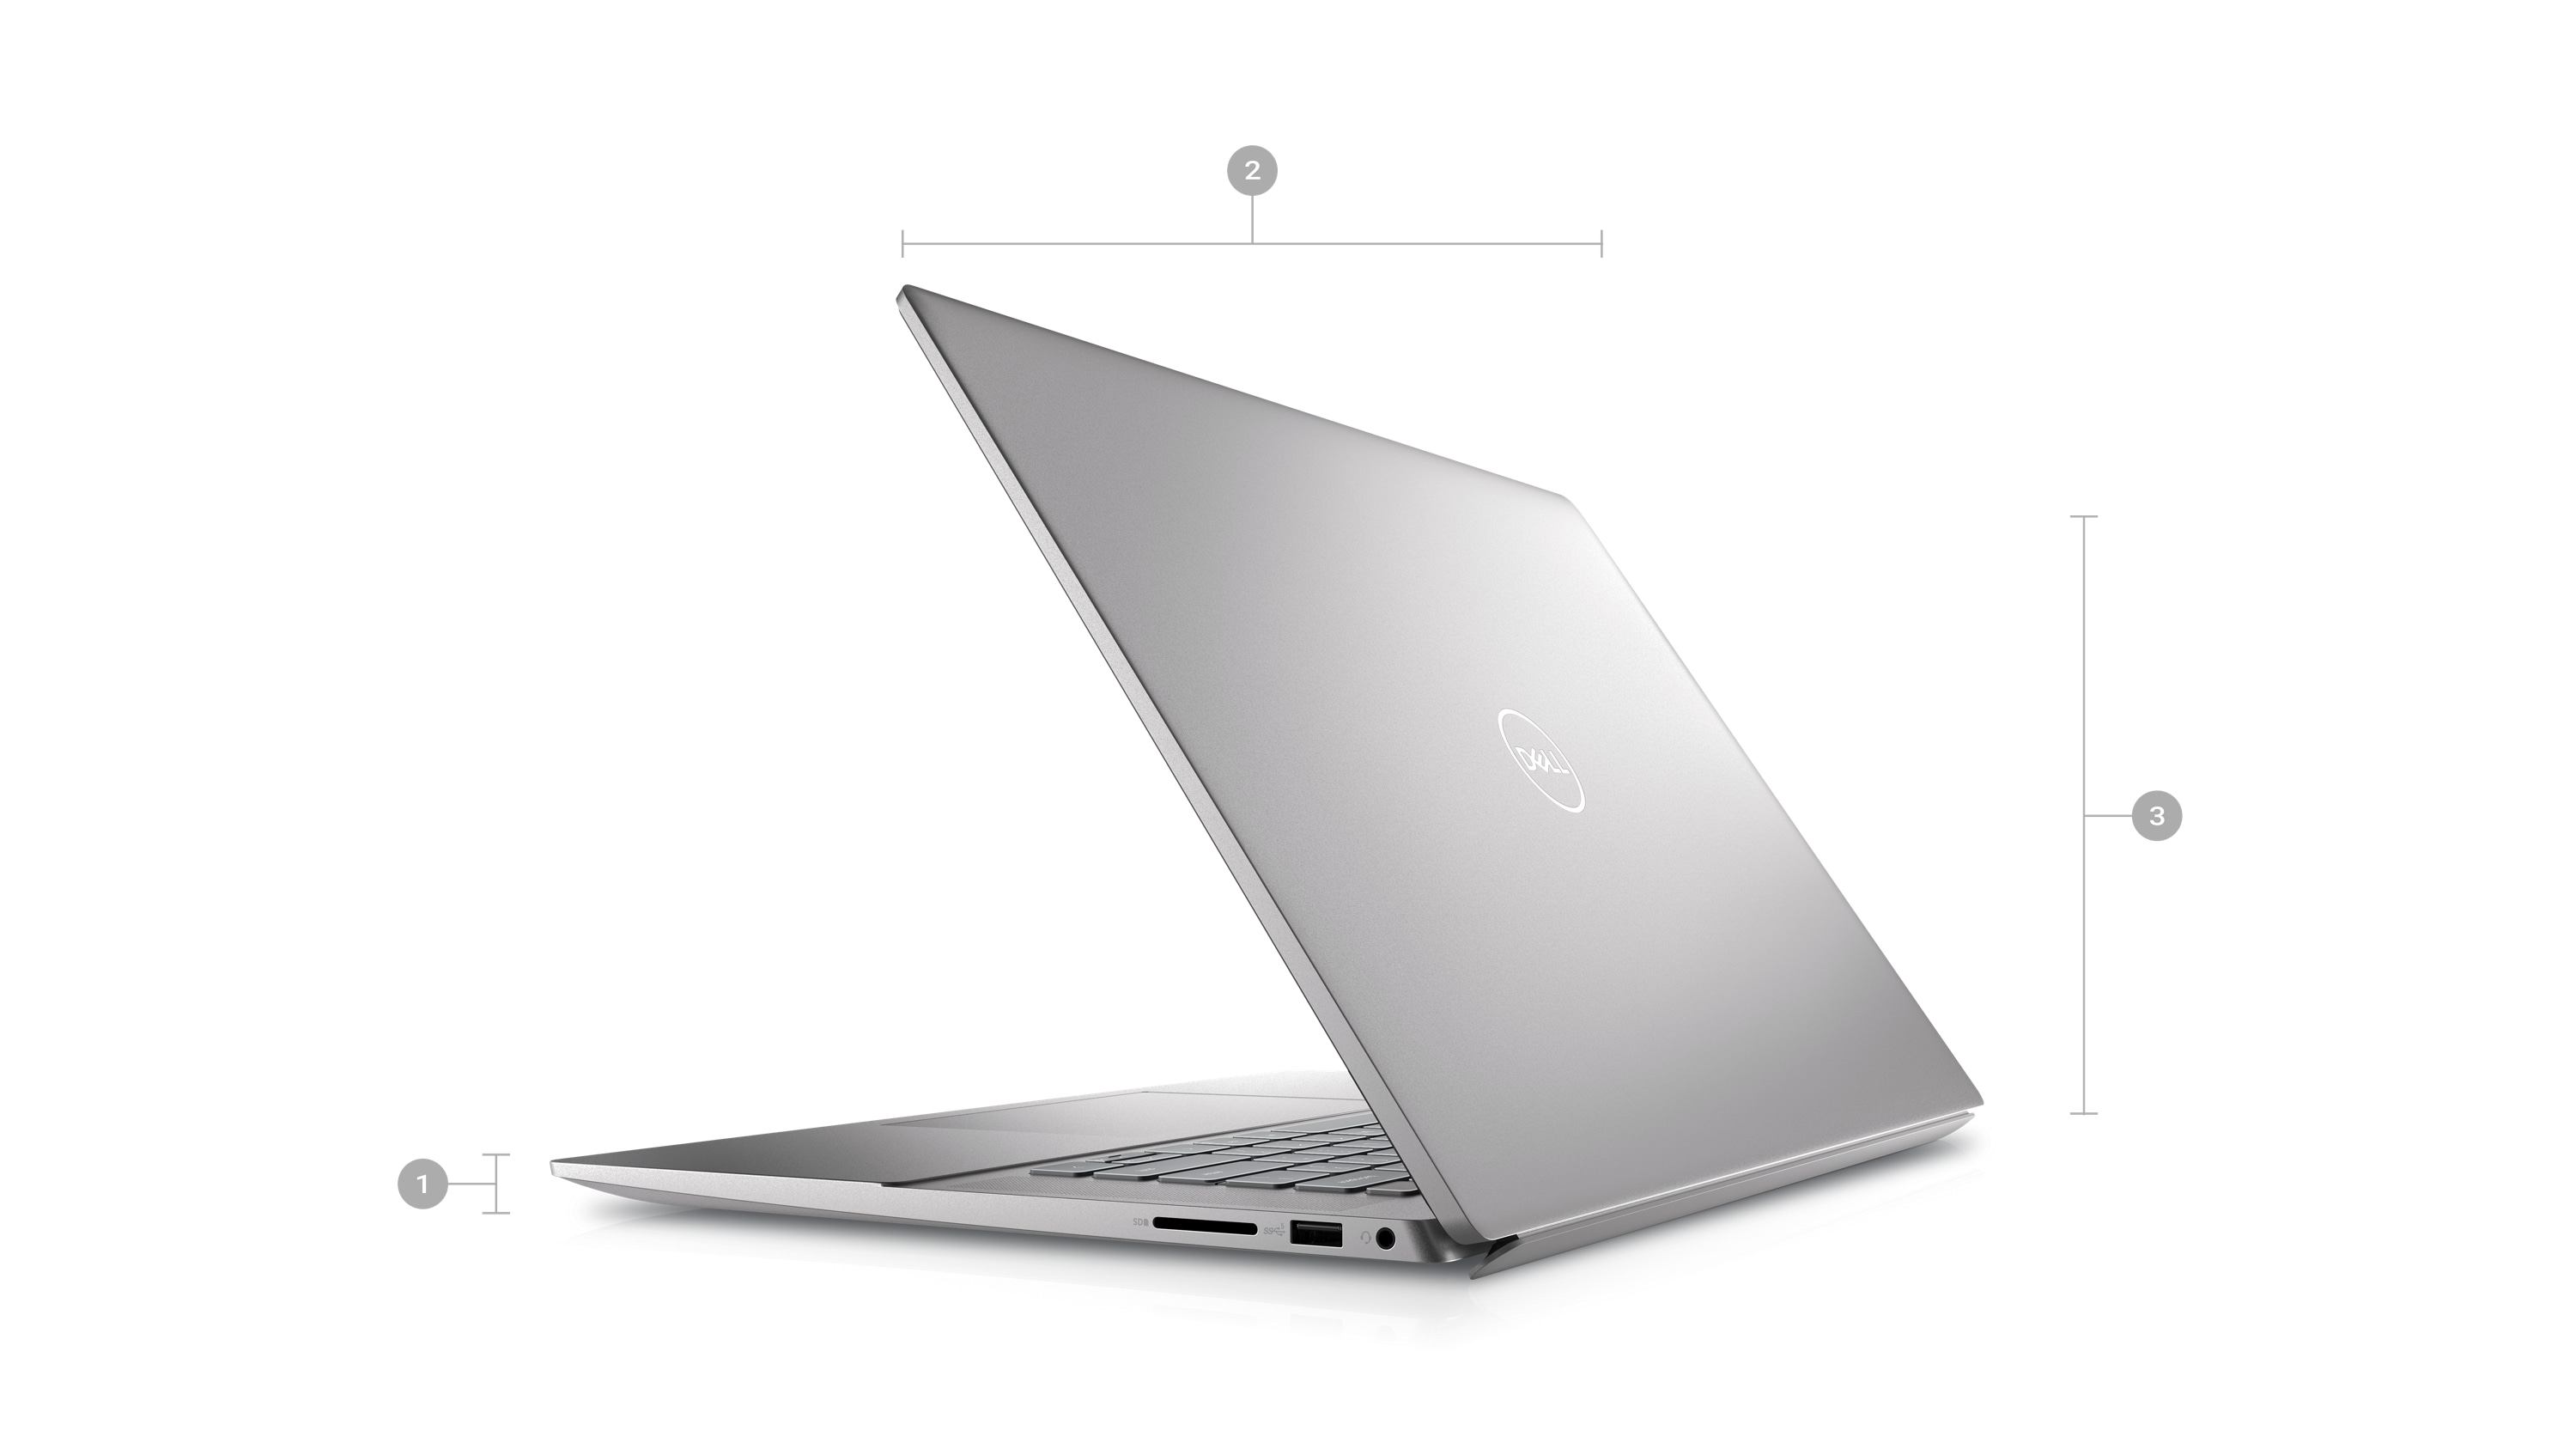 Picture of a Dell Inspiron 5620 laptop with its back visible and numbers from 1 to 3 signaling product dimensions and weight.